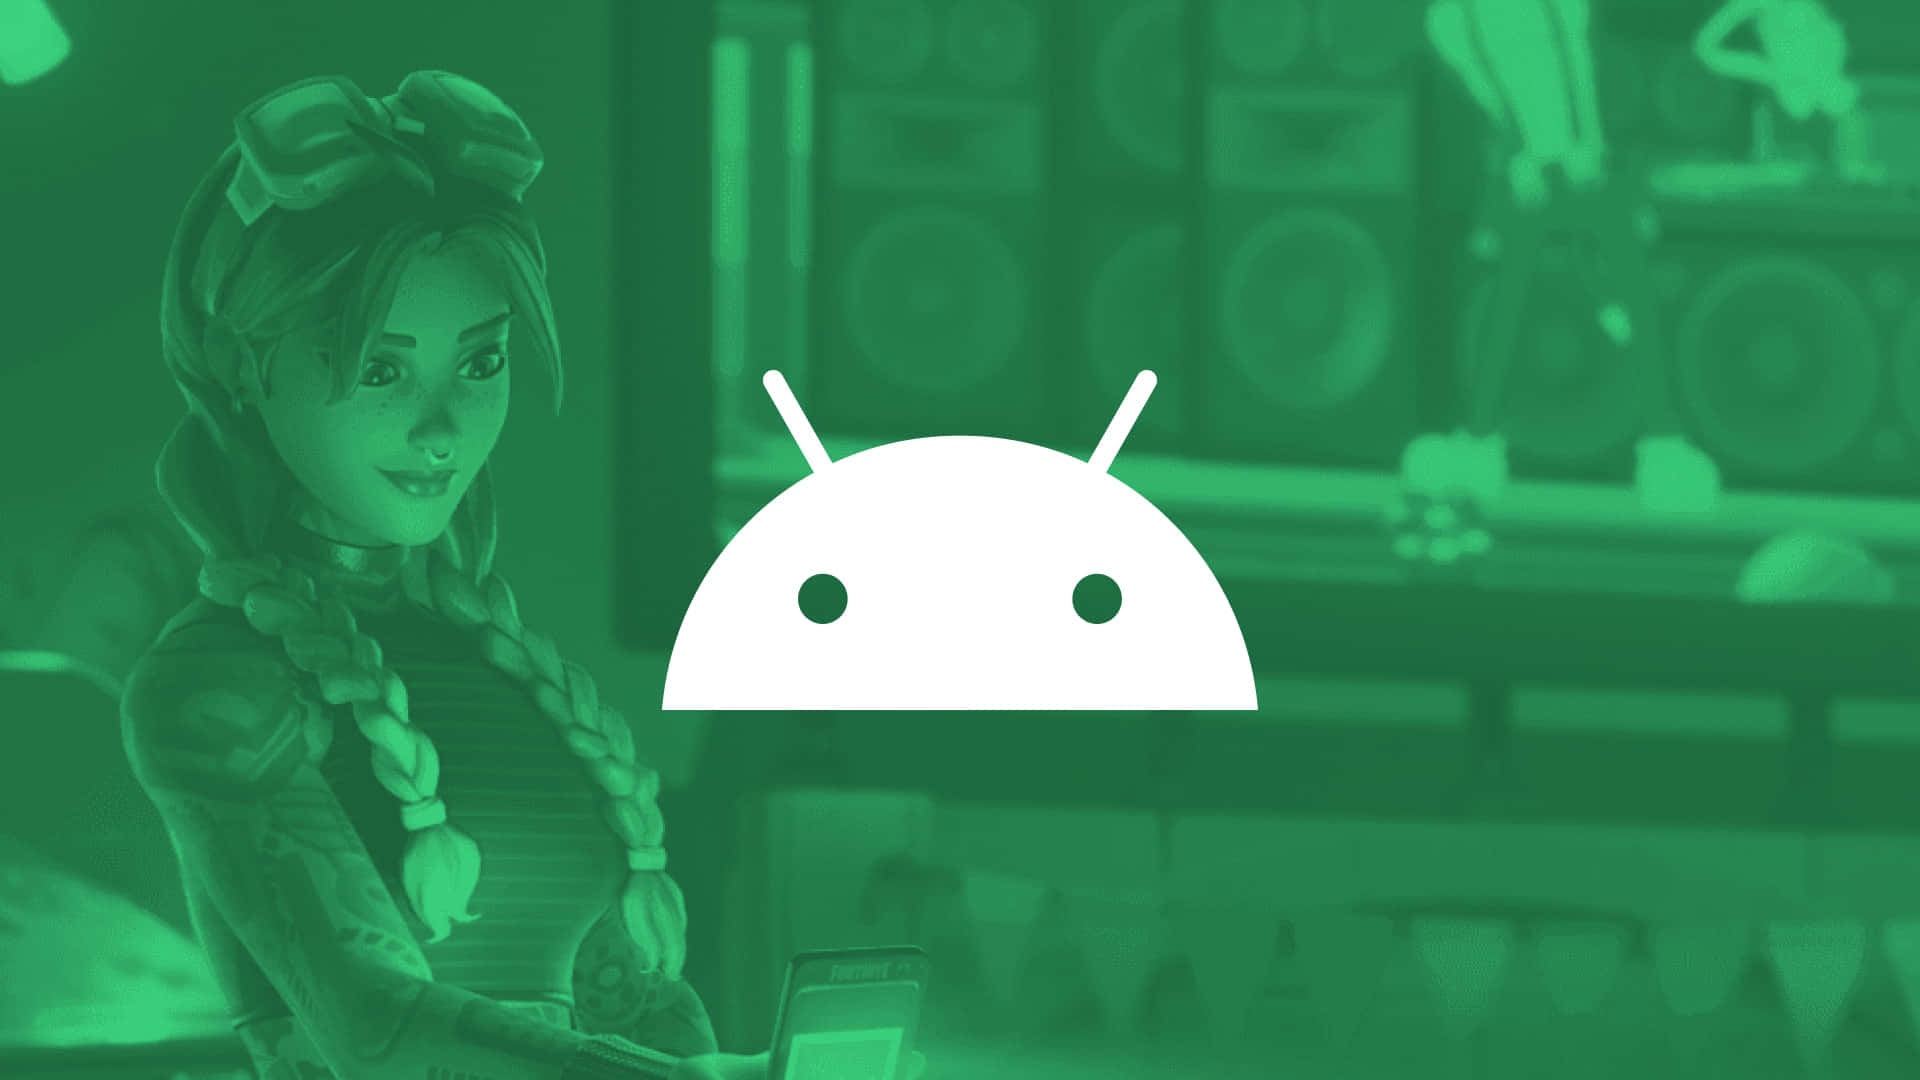 Android Os - A Girl In A Green Dress